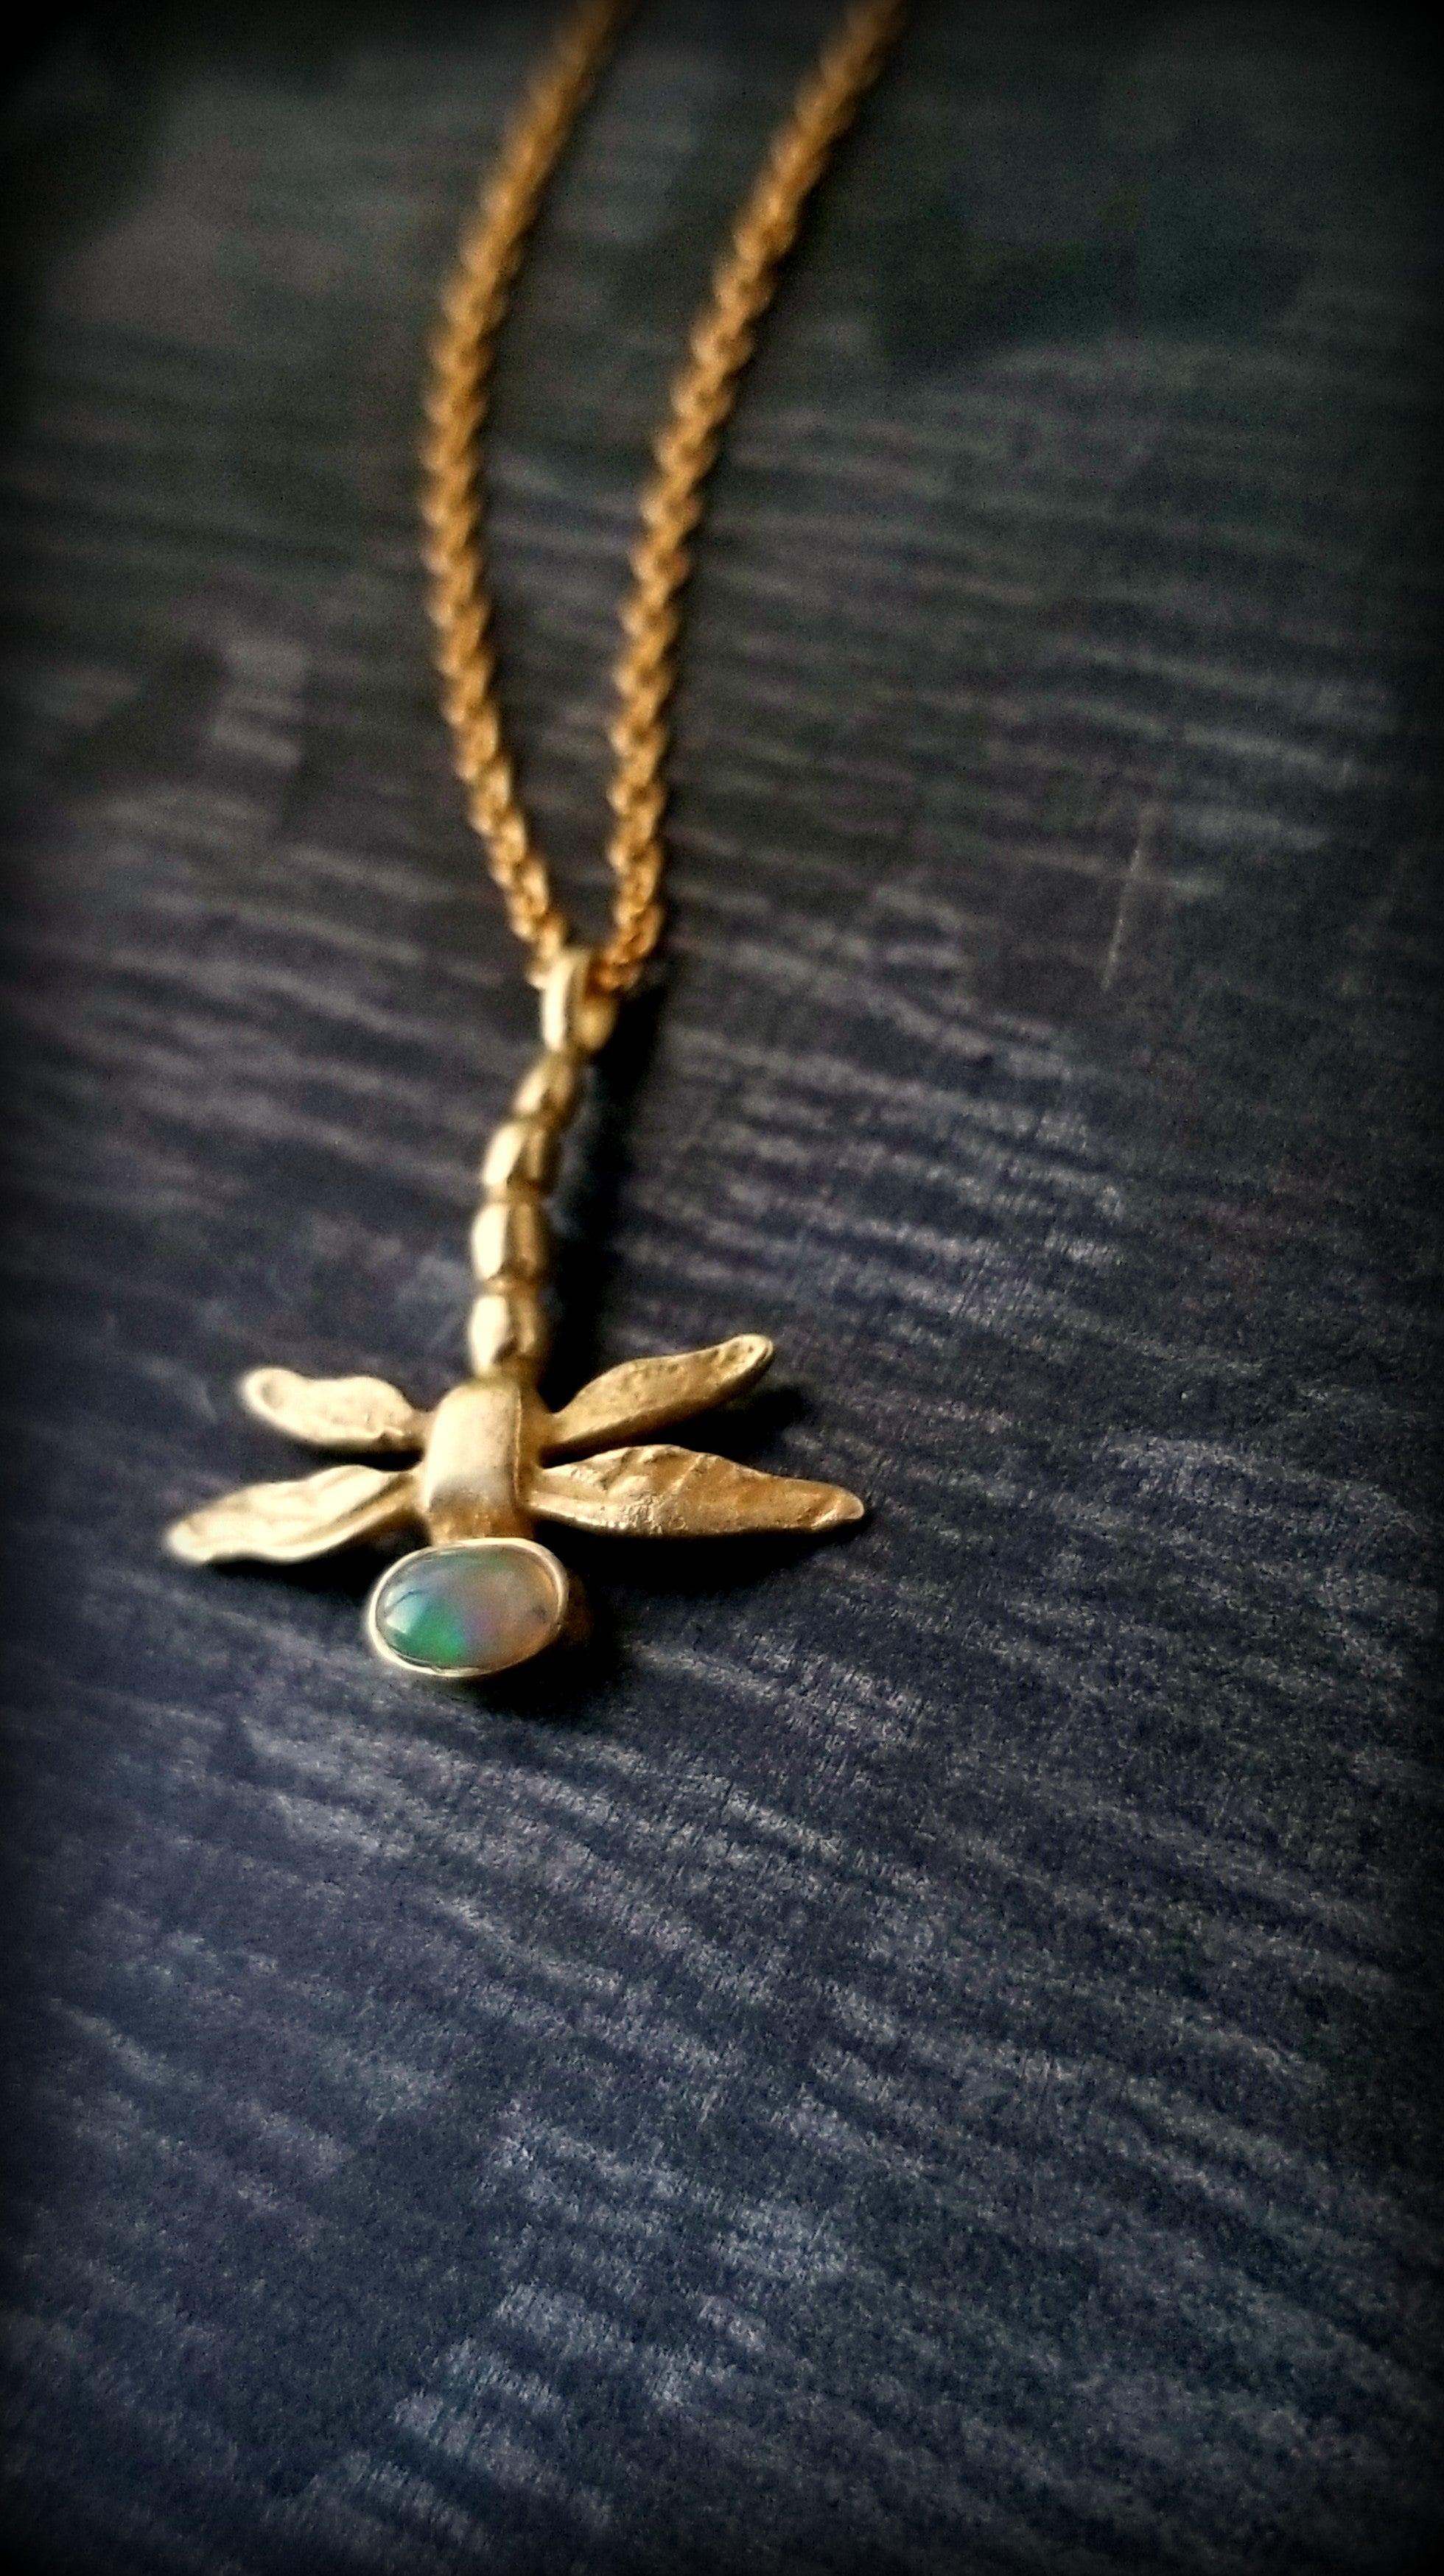 Dragonfly Necklace with Apatite Gemstones - Fifth Energy Jewelry